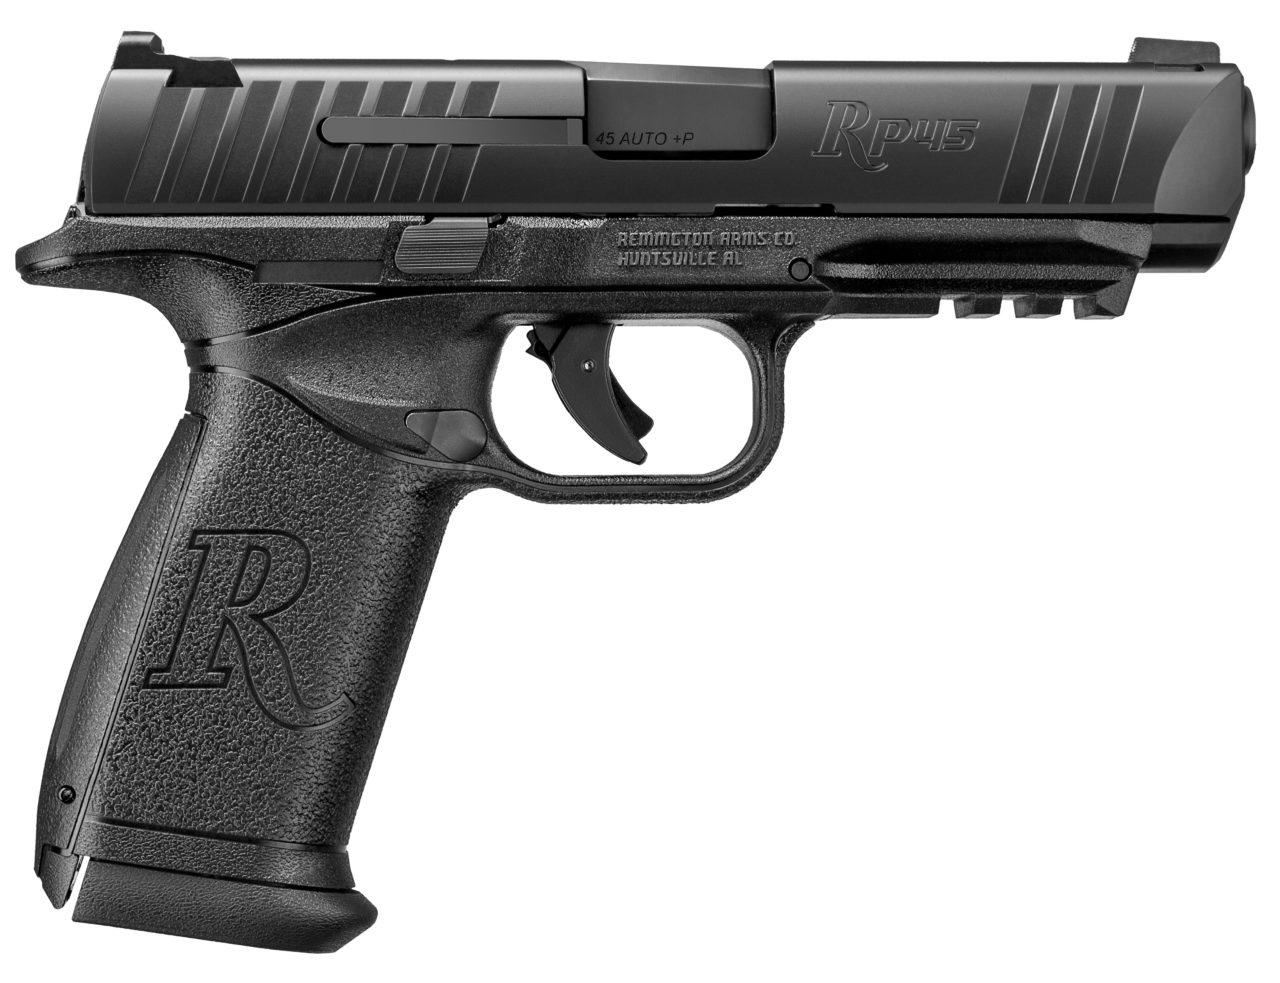 Remington RP45 Full-Size Striker Fired Pistol Now Available at Retail